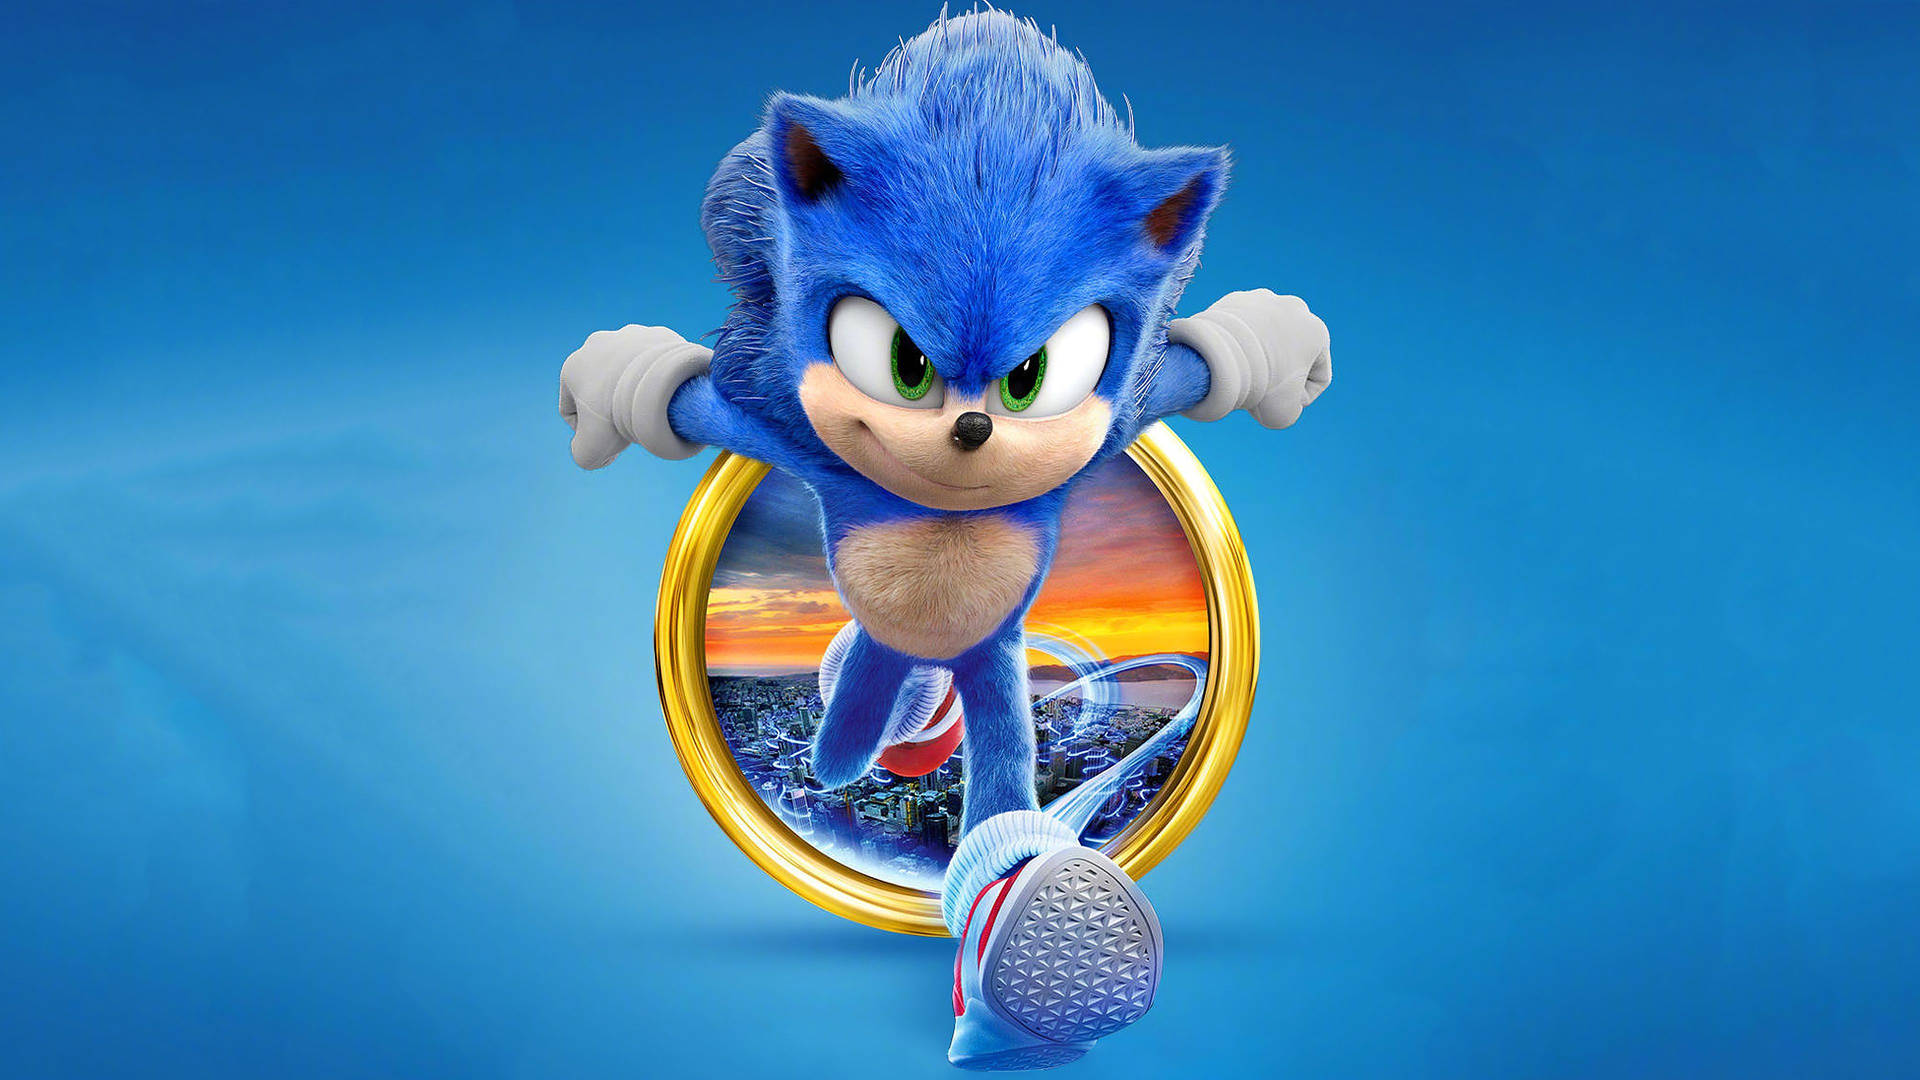 Sonic The Hedgehog Passing Through A Golden Ring Wallpaper